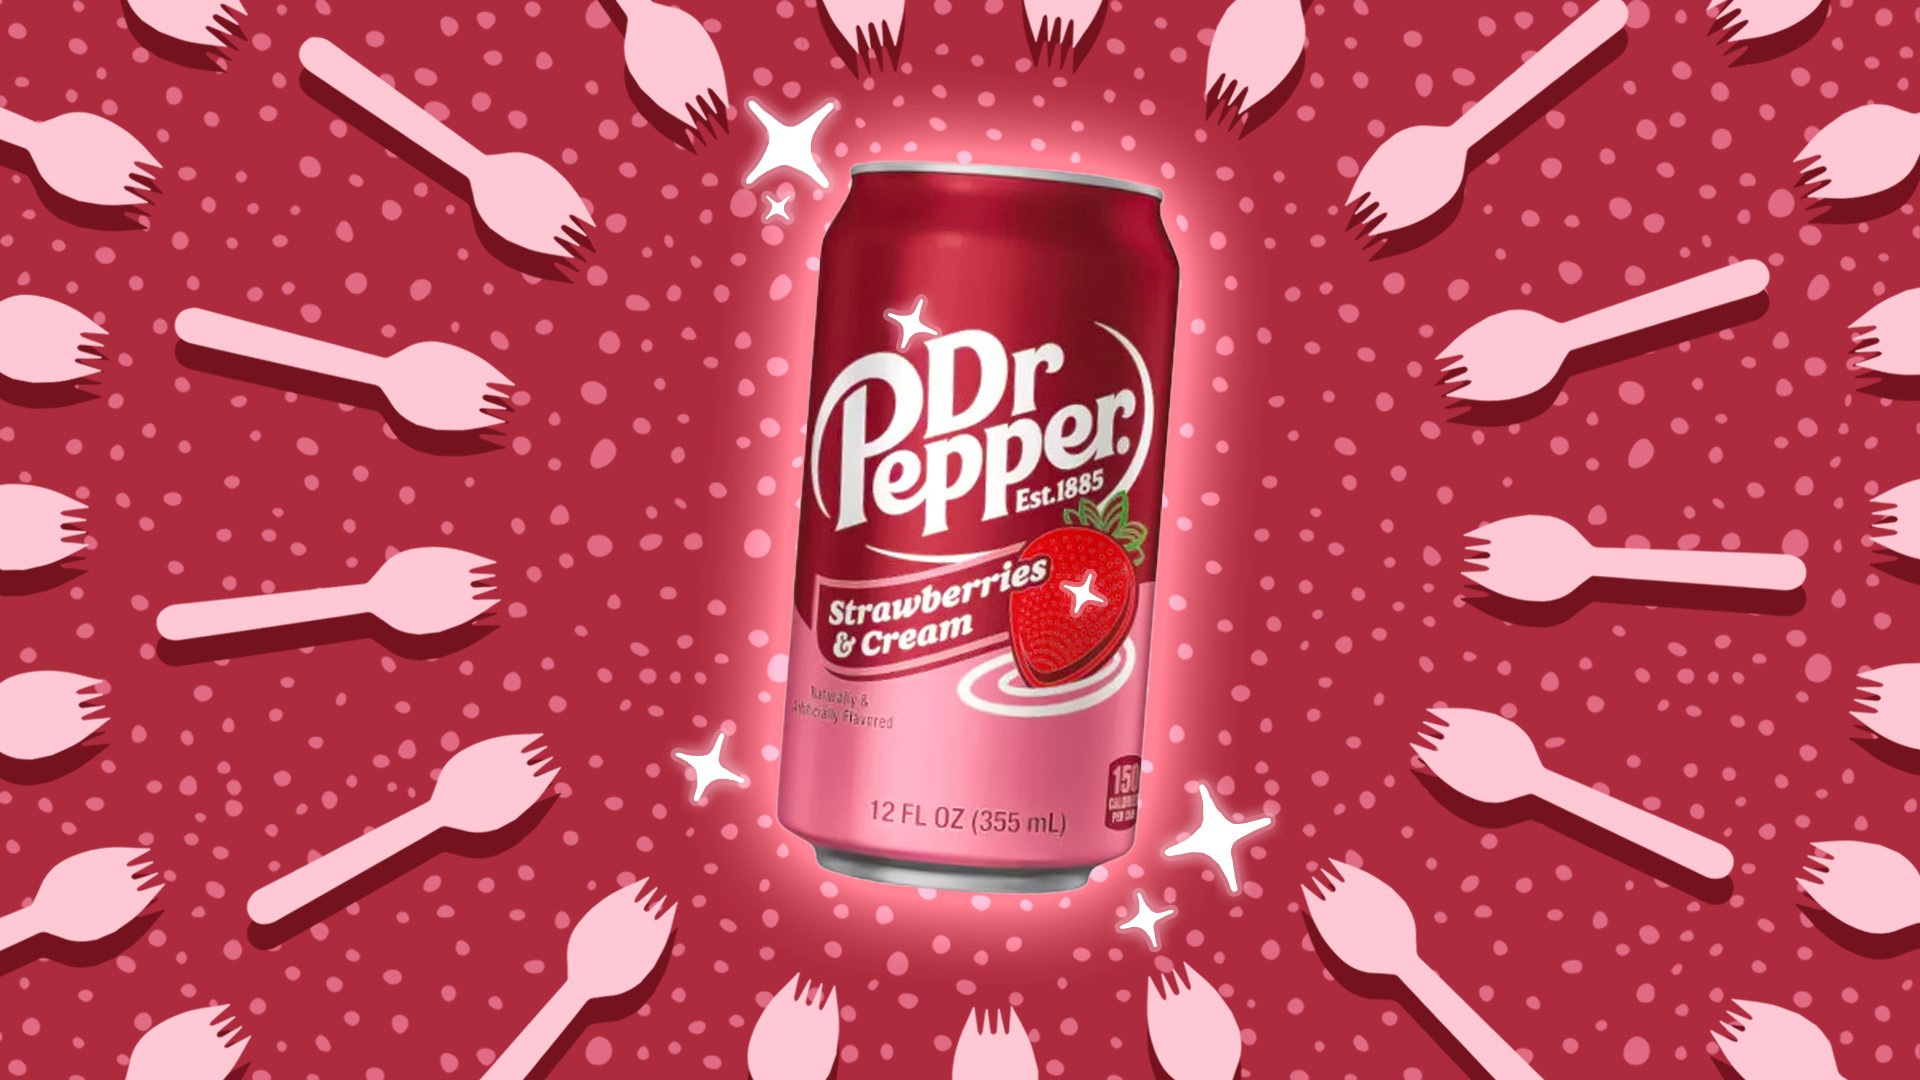 16-astounding-facts-about-dr-pepper-strawberries-and-cream